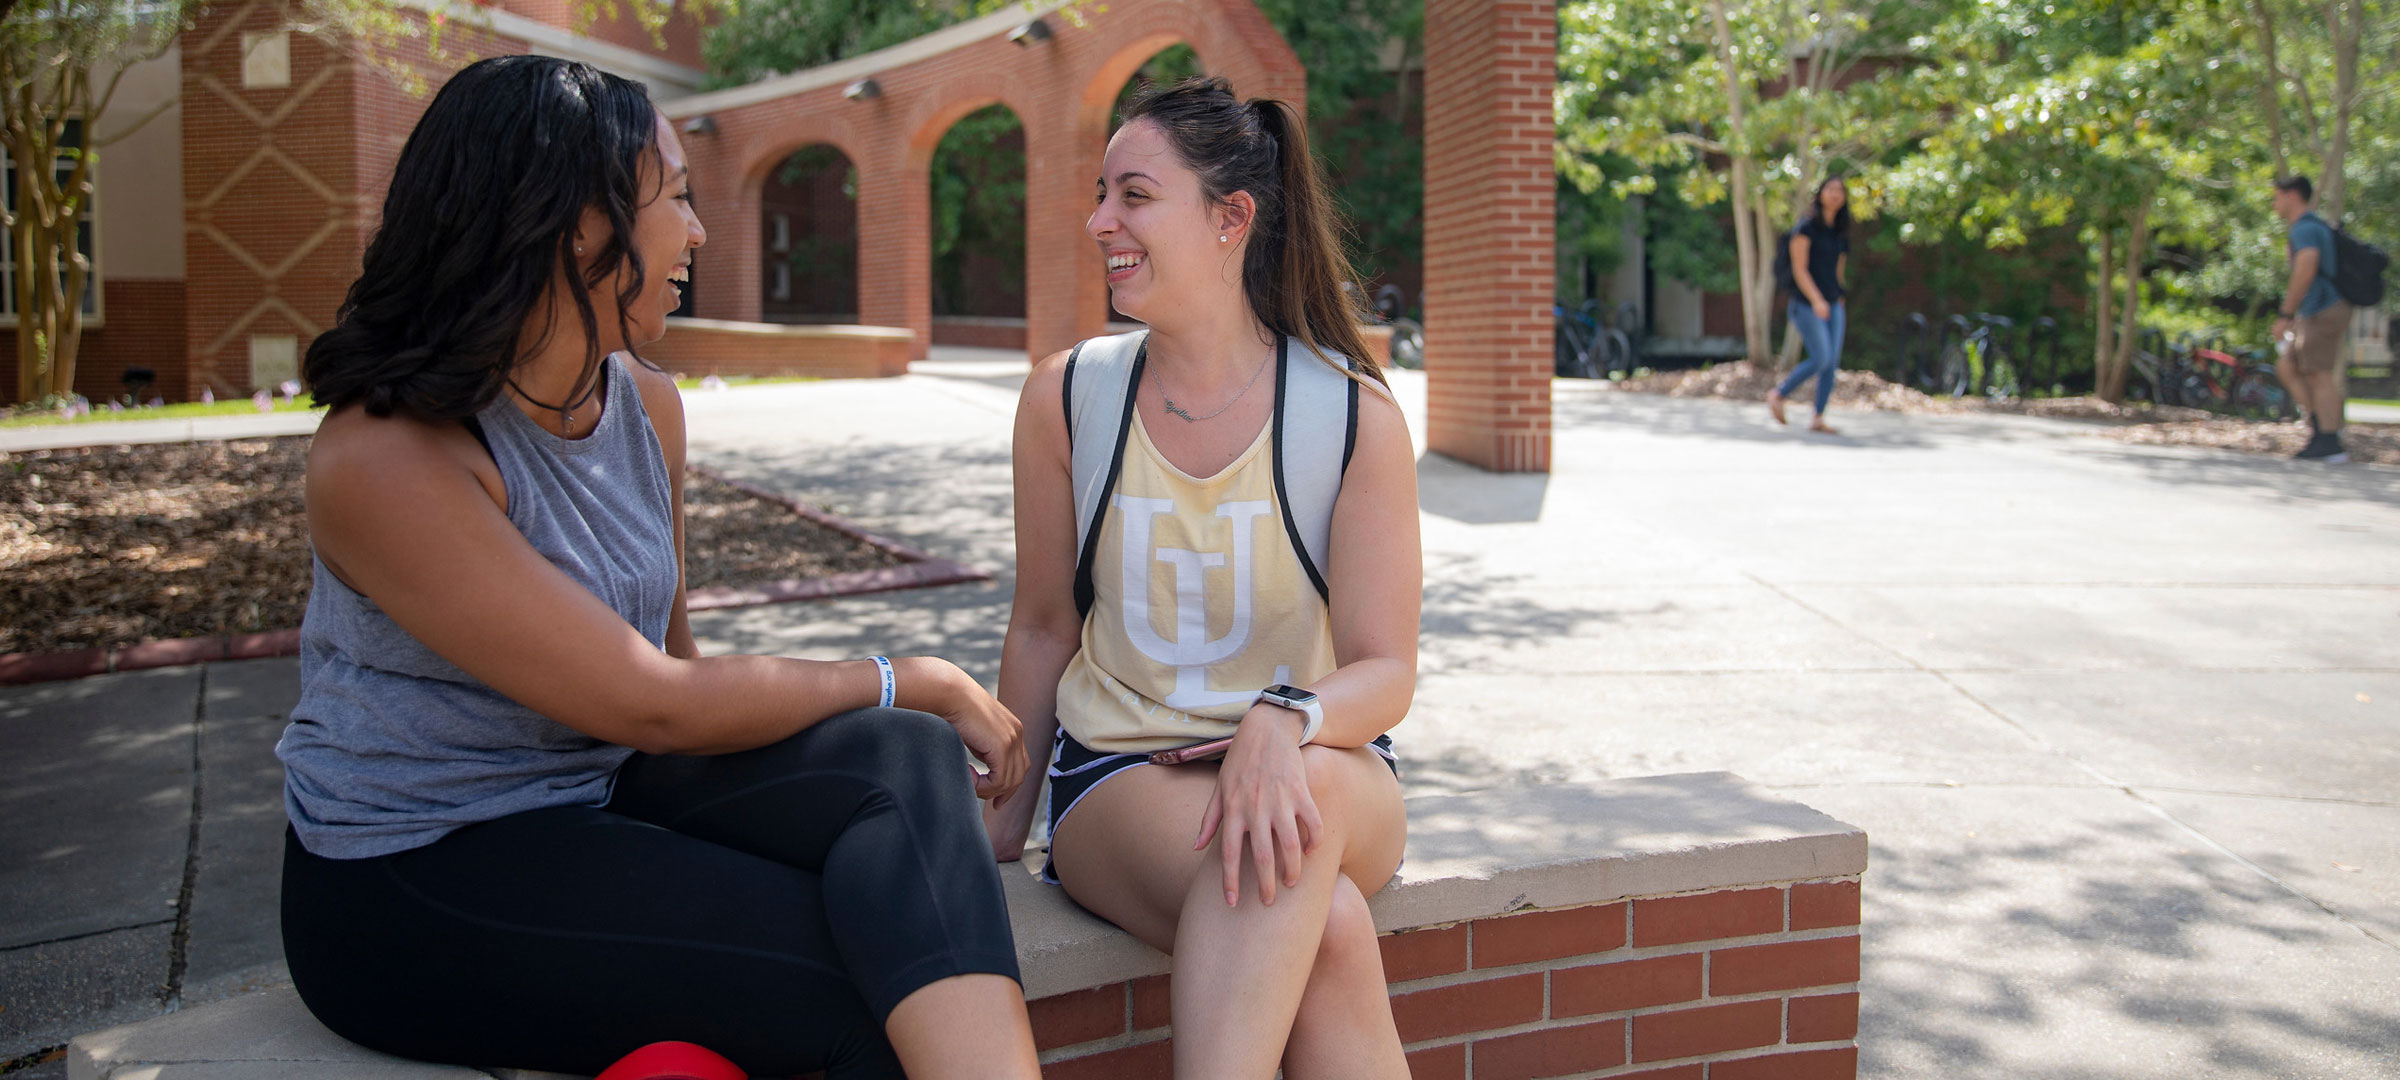 Two University of Louisiana at Lafayette students sit and talk on a bench on campus